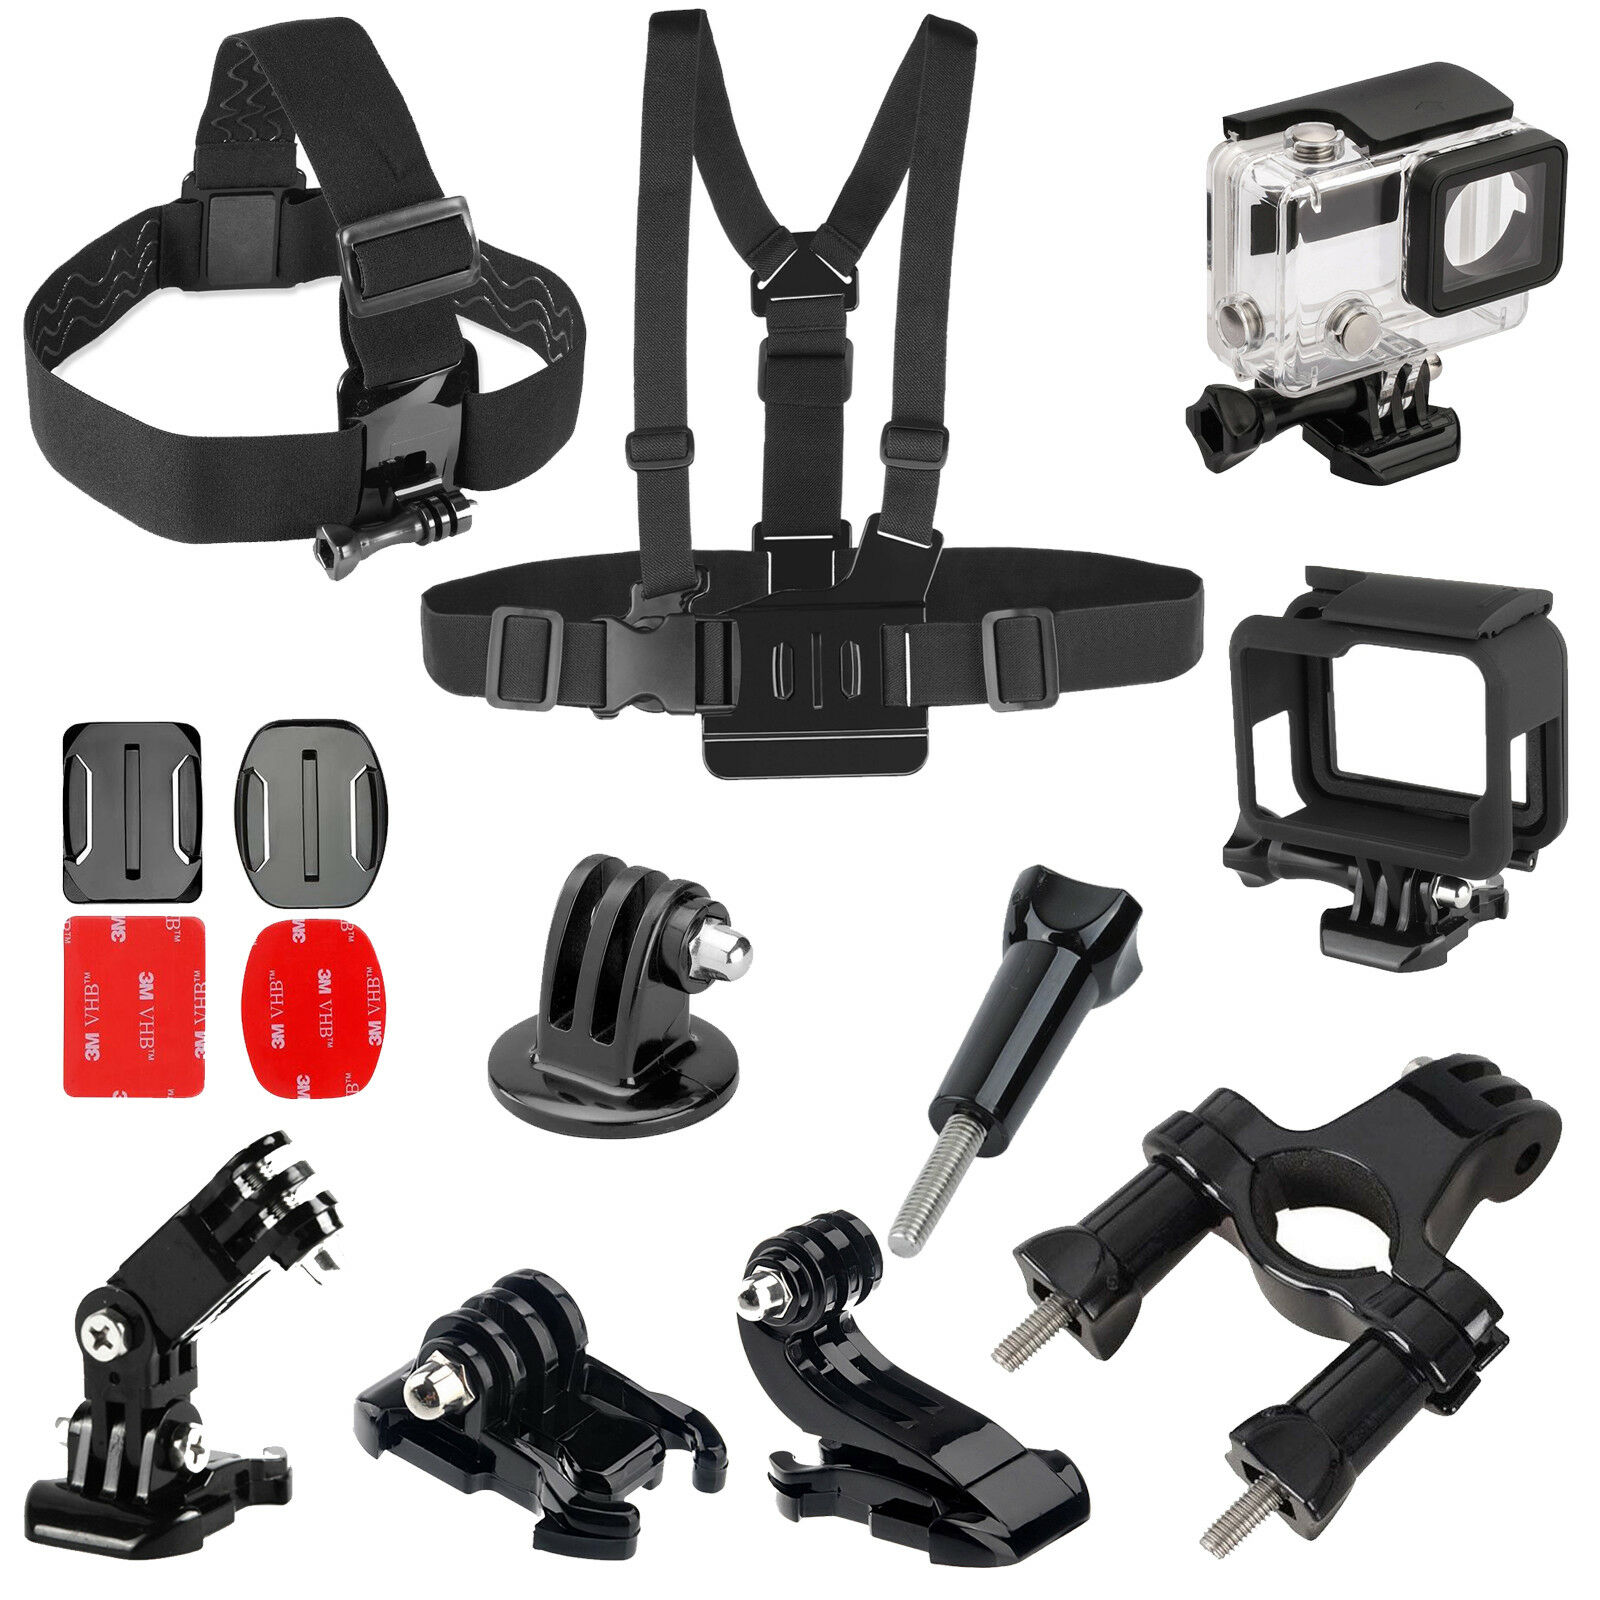 Sports Camera Accessories Kit Set For Gopro Go Pro Hero 5 4 3+3 2 1 Outdoors Us